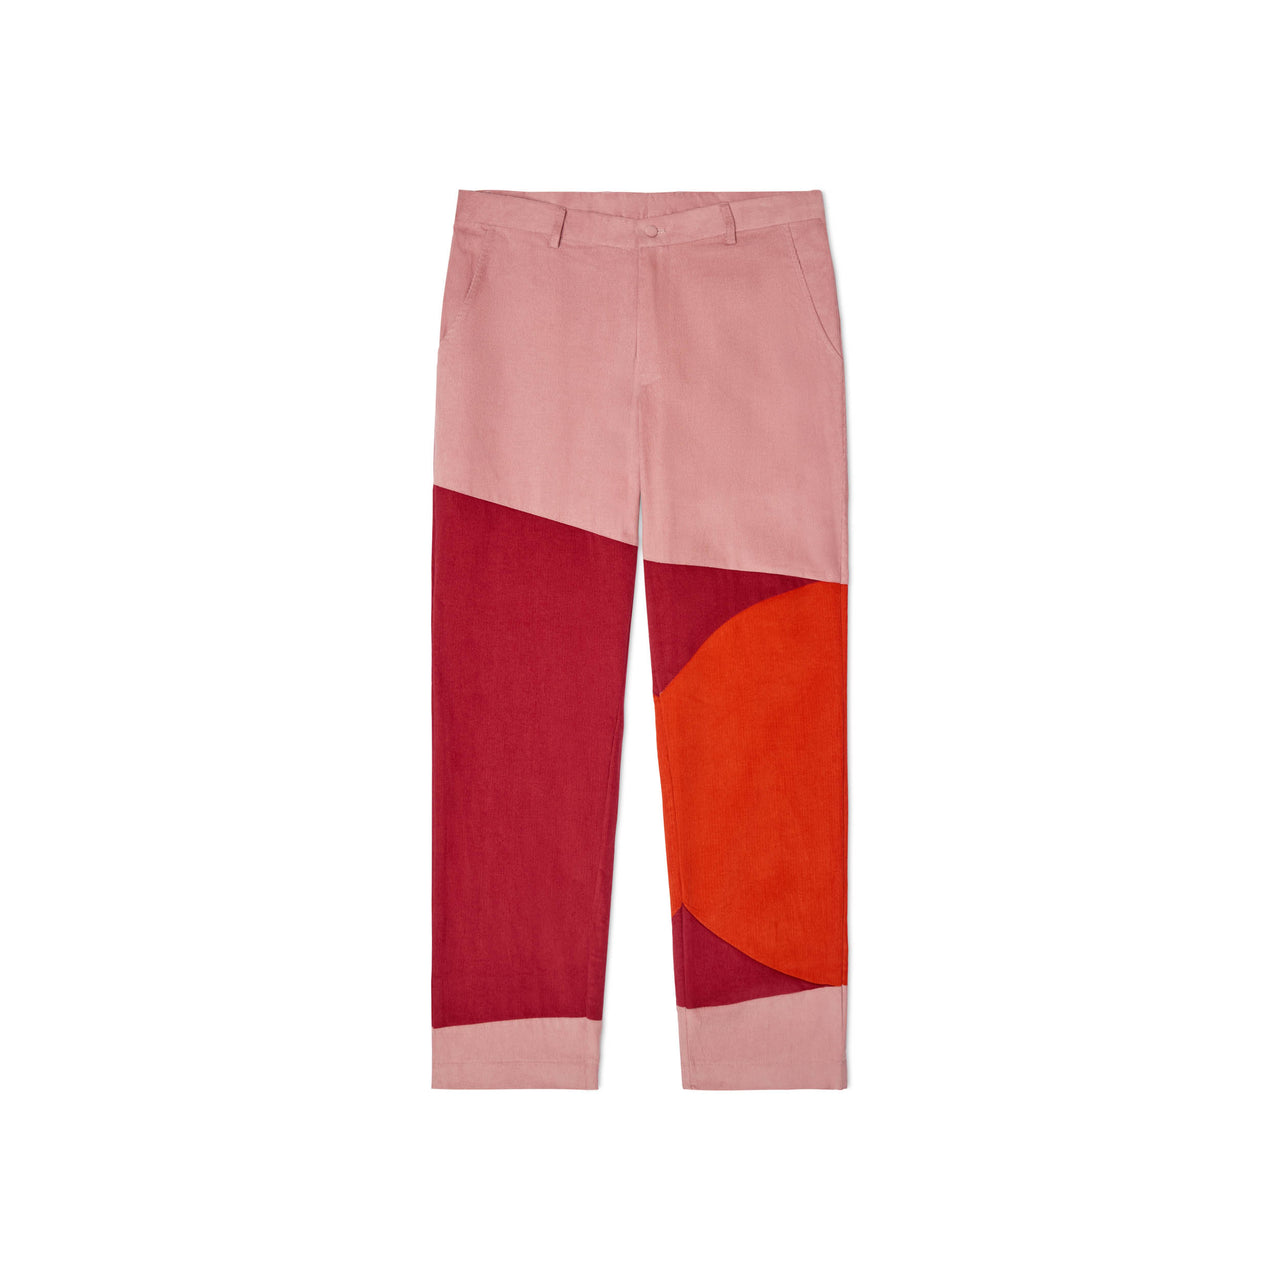 Geometric Shapes Suit Bottom [Red]